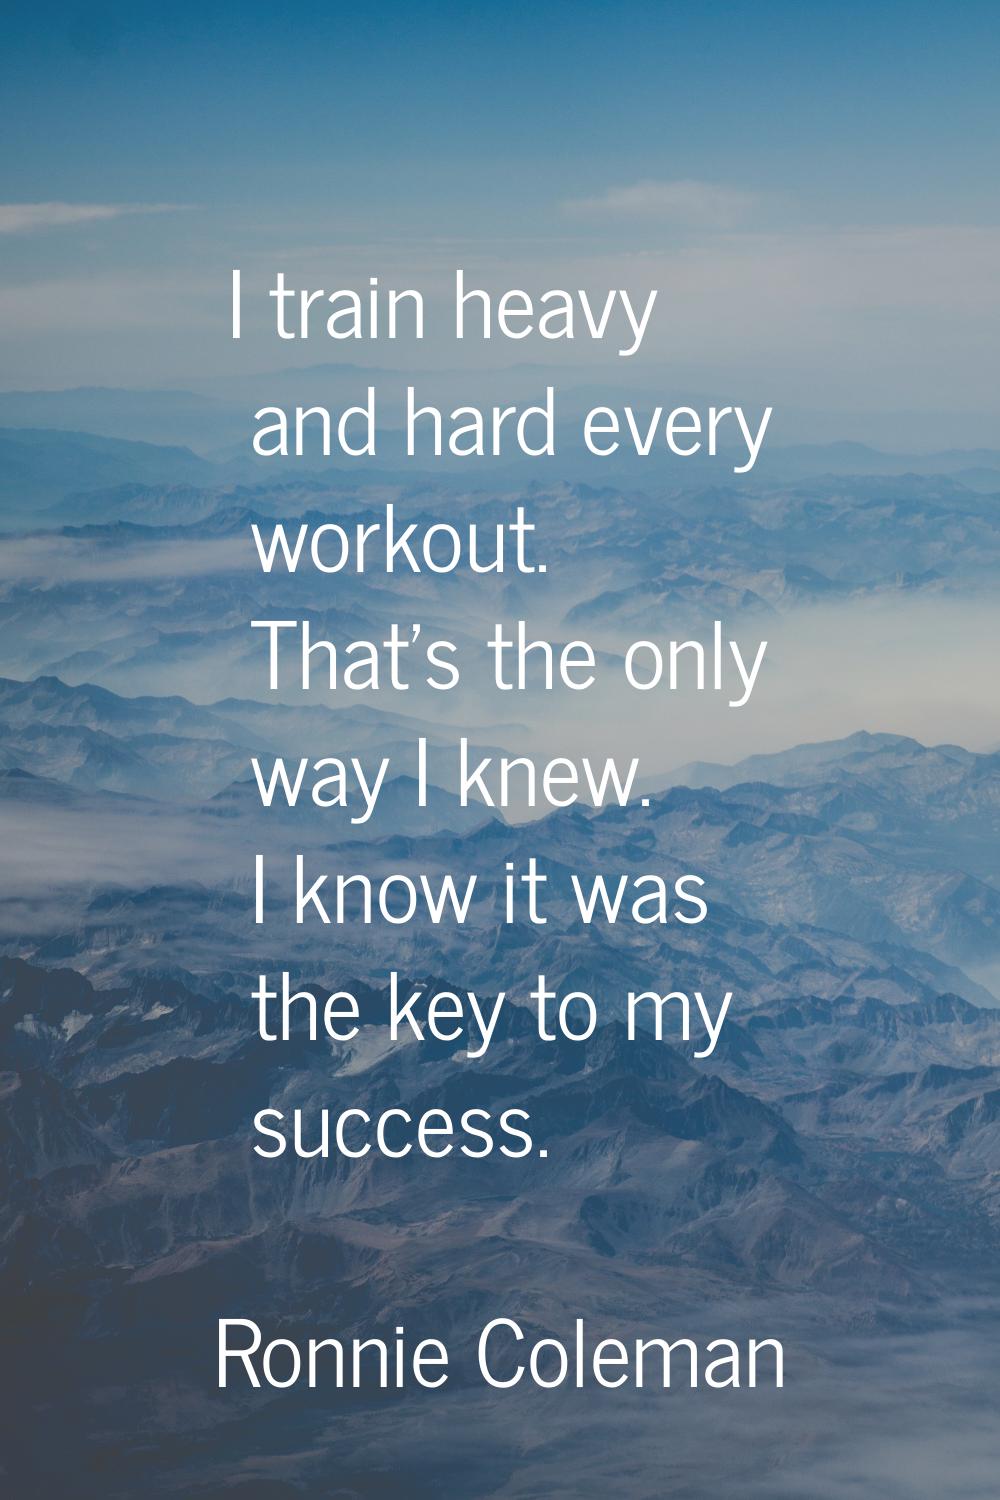 I train heavy and hard every workout. That's the only way I knew. I know it was the key to my succe